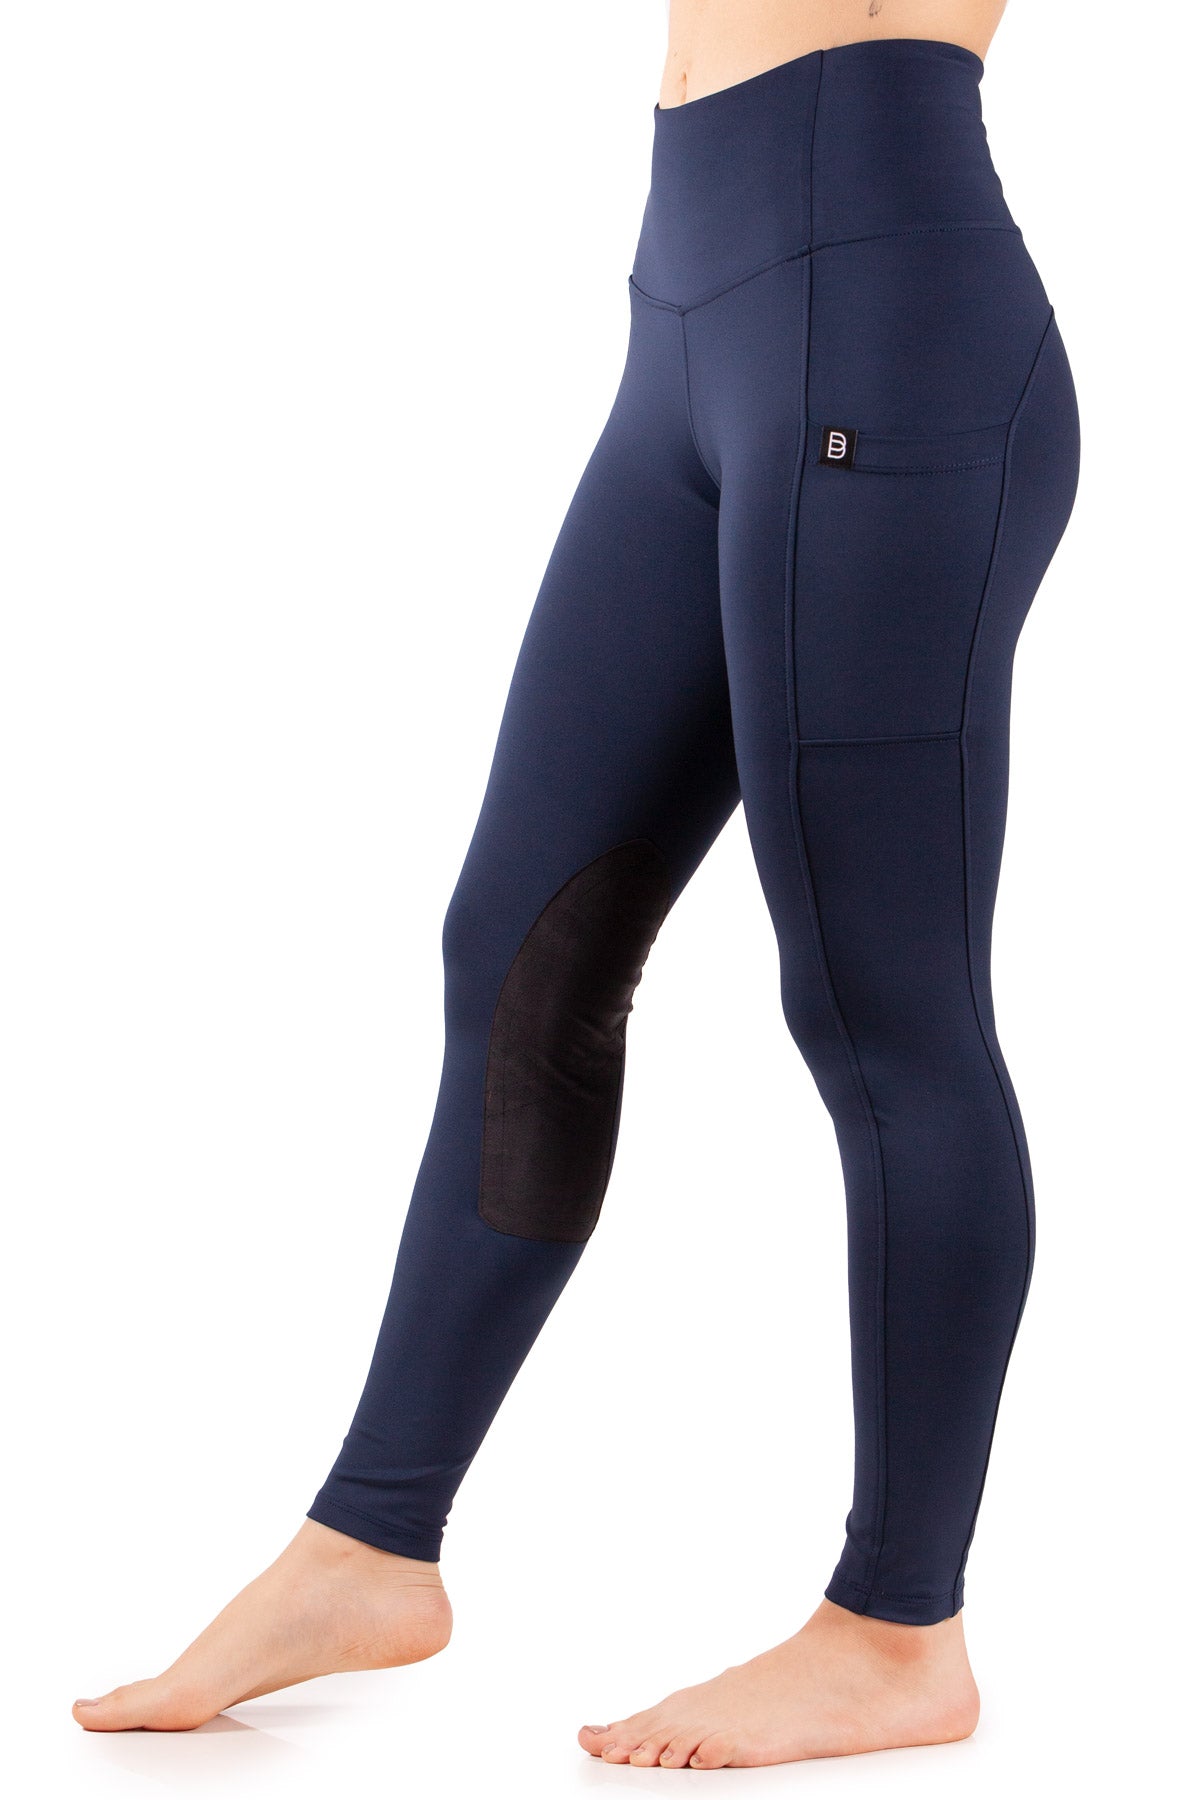 eco friendly riding tights